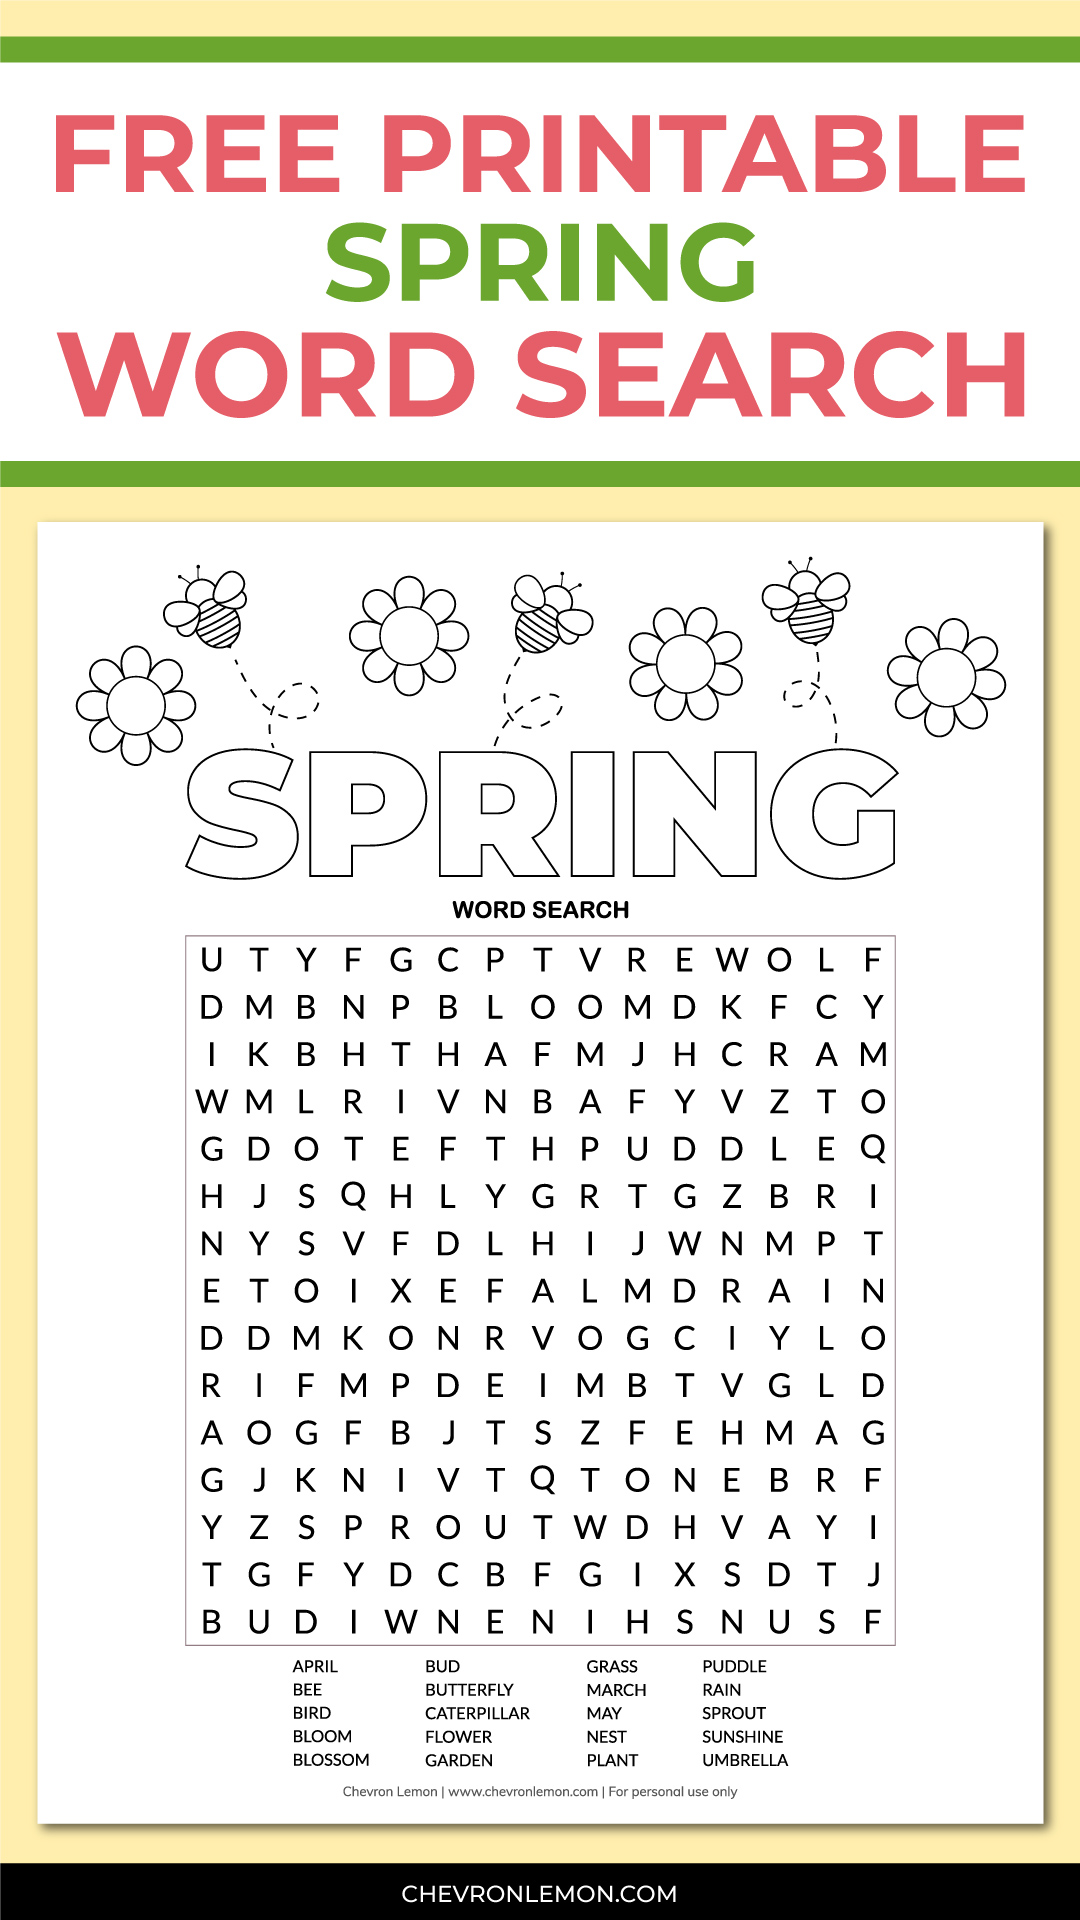 Printable spring word search